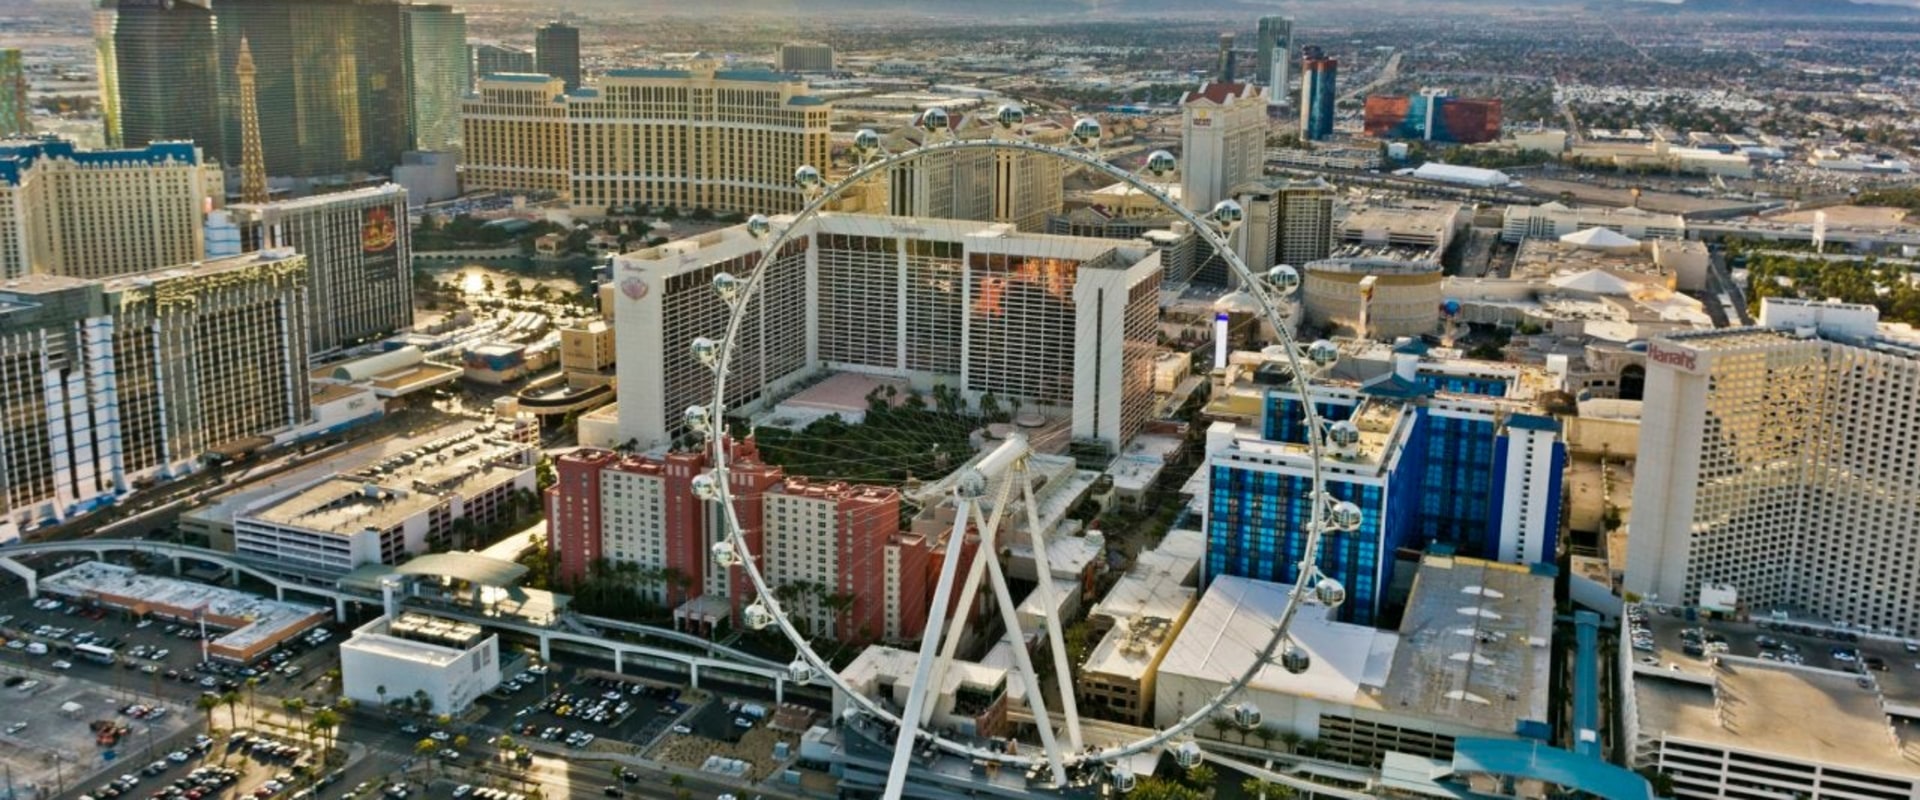 Is Las Vegas a Buyer's Market Now? - A Real Estate Expert's Perspective